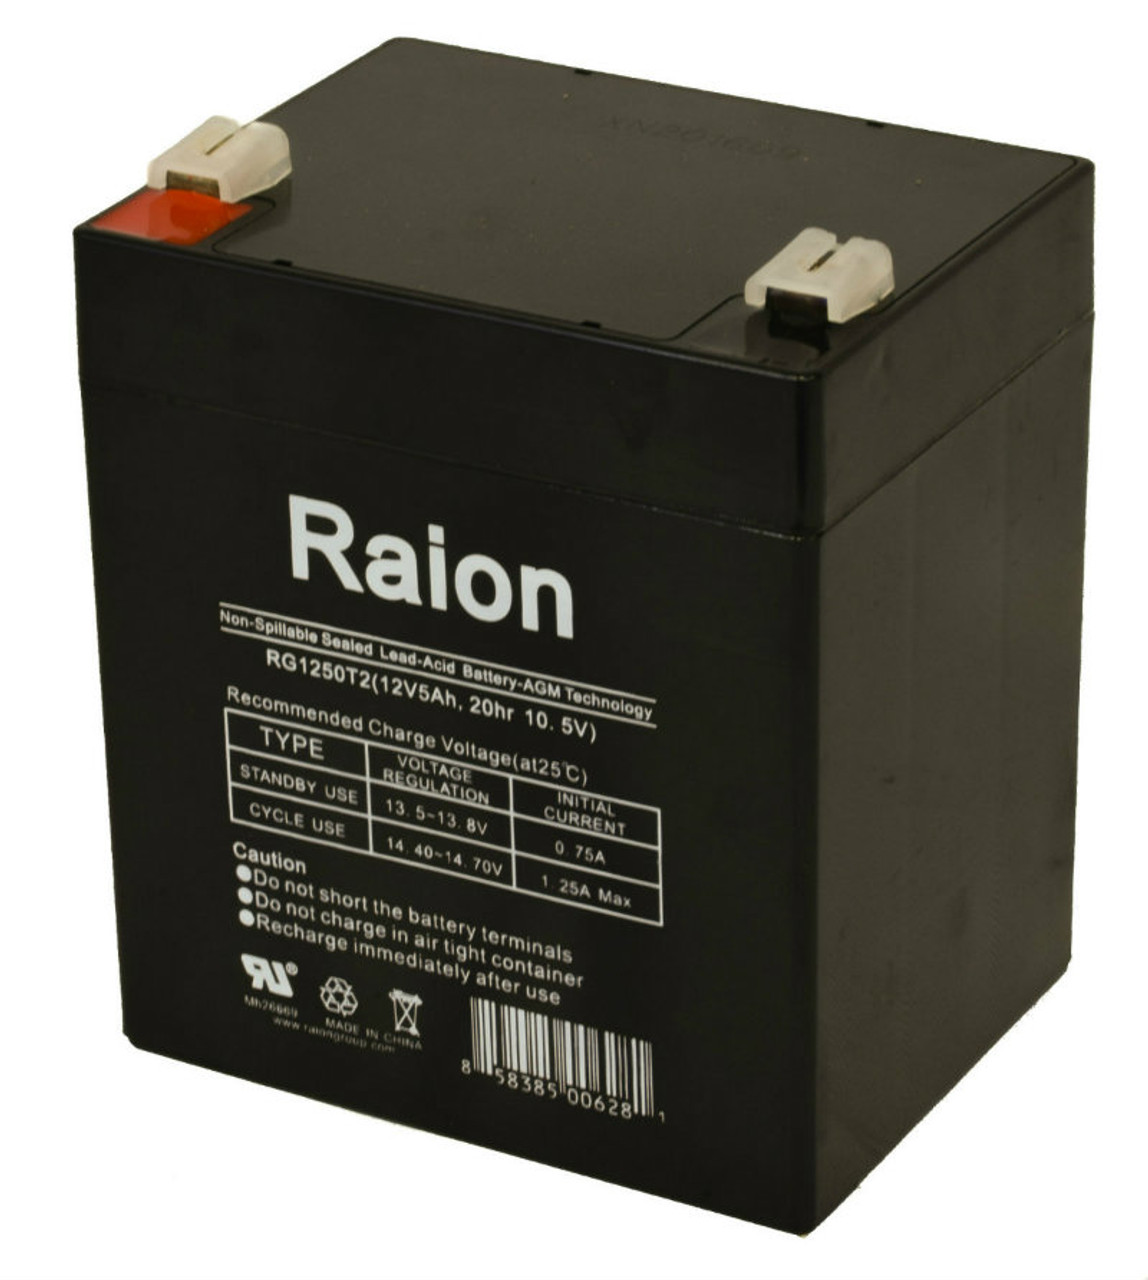 Raion Power 12V 5Ah Replacement Fire Alarm Control Panel Battery for Napco Alarms MA1016LKDL